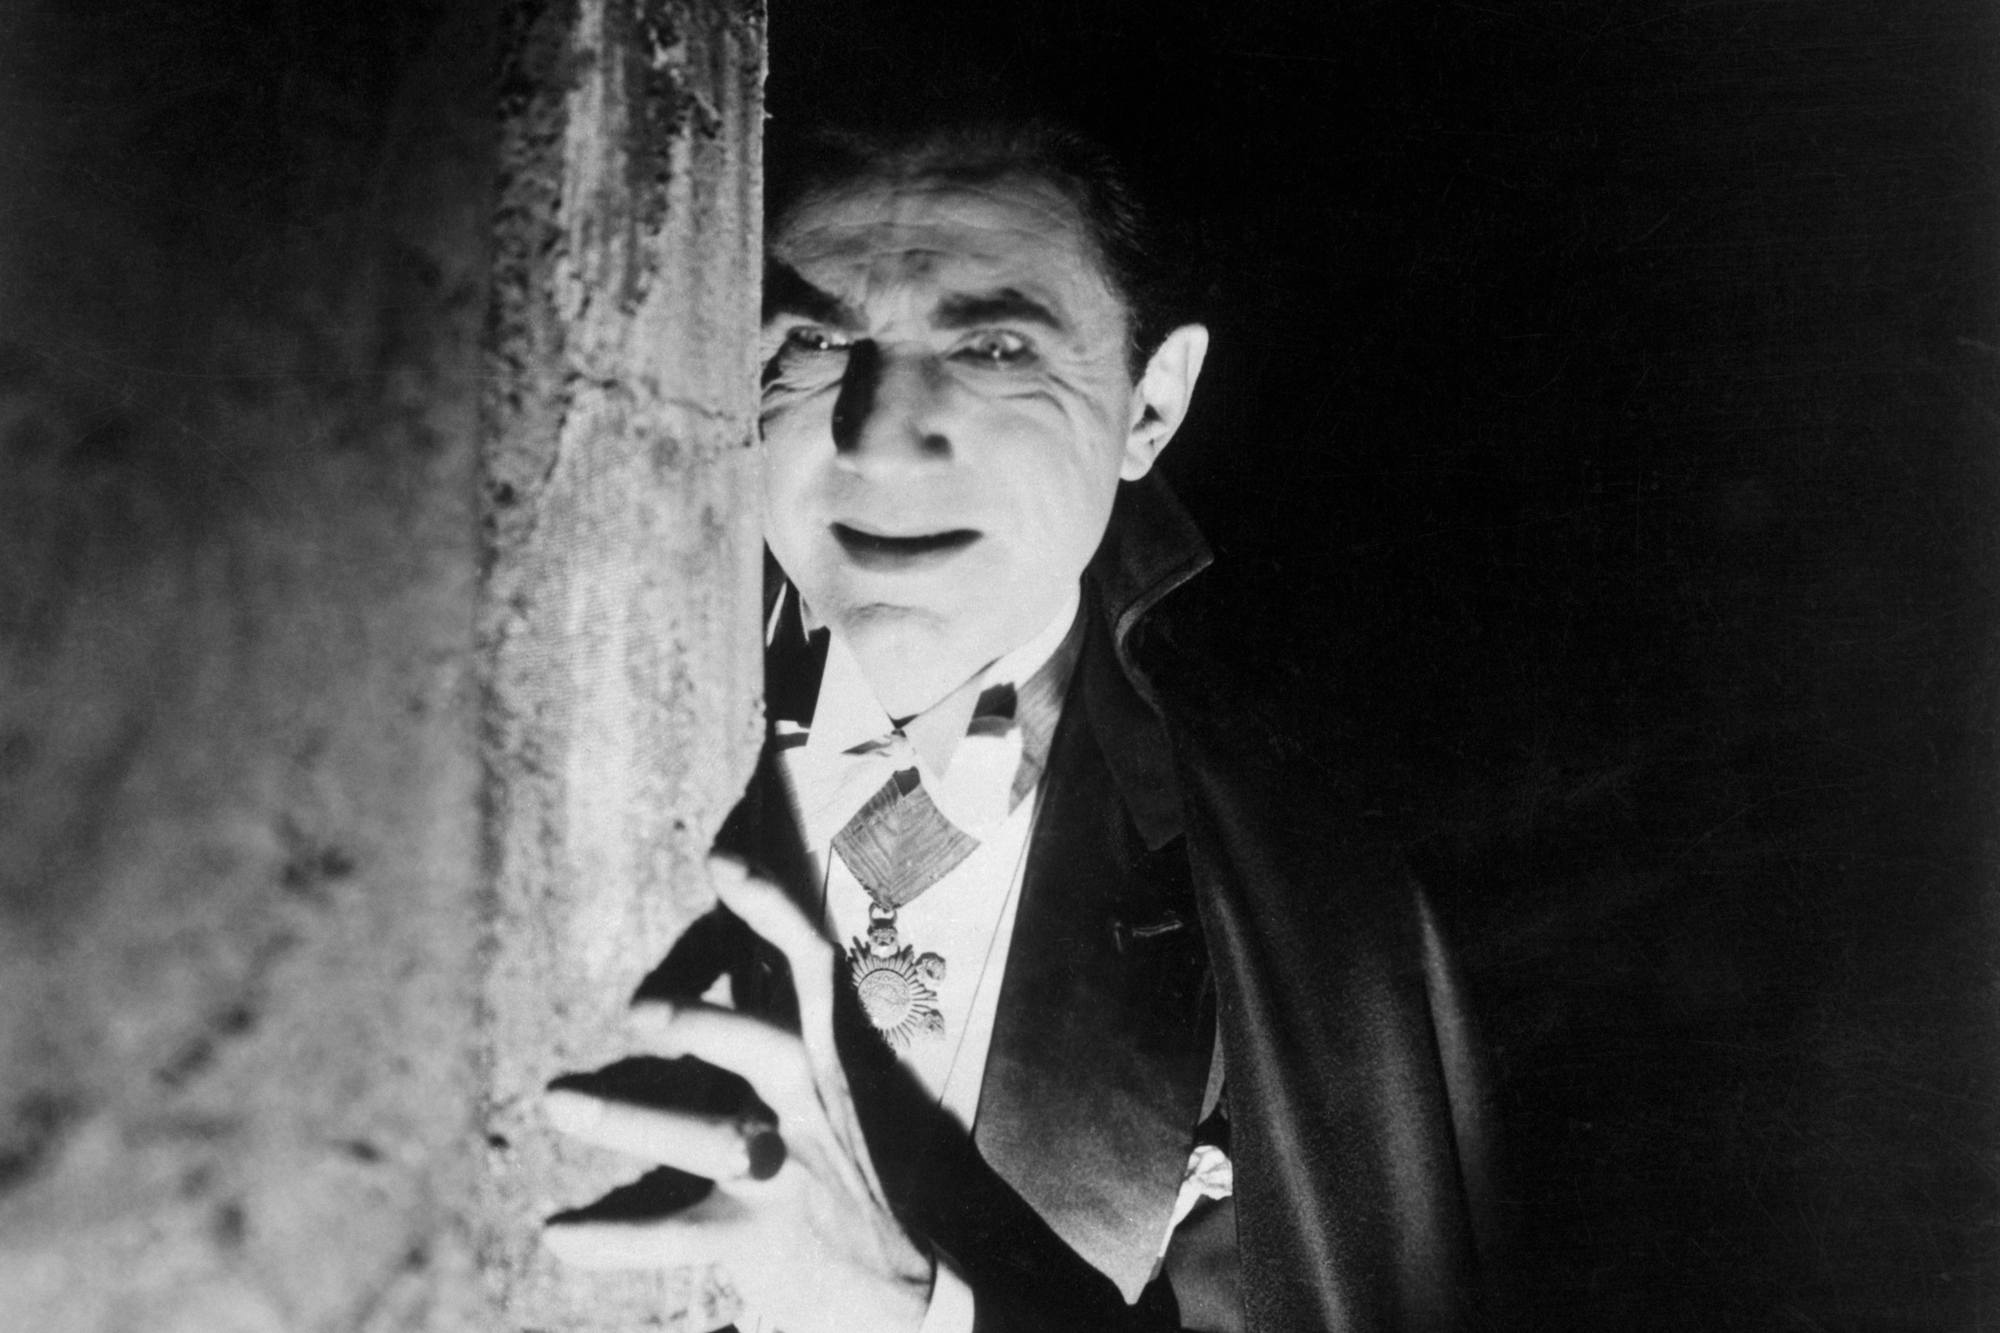 Vampire movies 'Dracula' Bela Lugosi as Dracula hiding behind a wall, with his hand resting on it. He has a devilish smile.